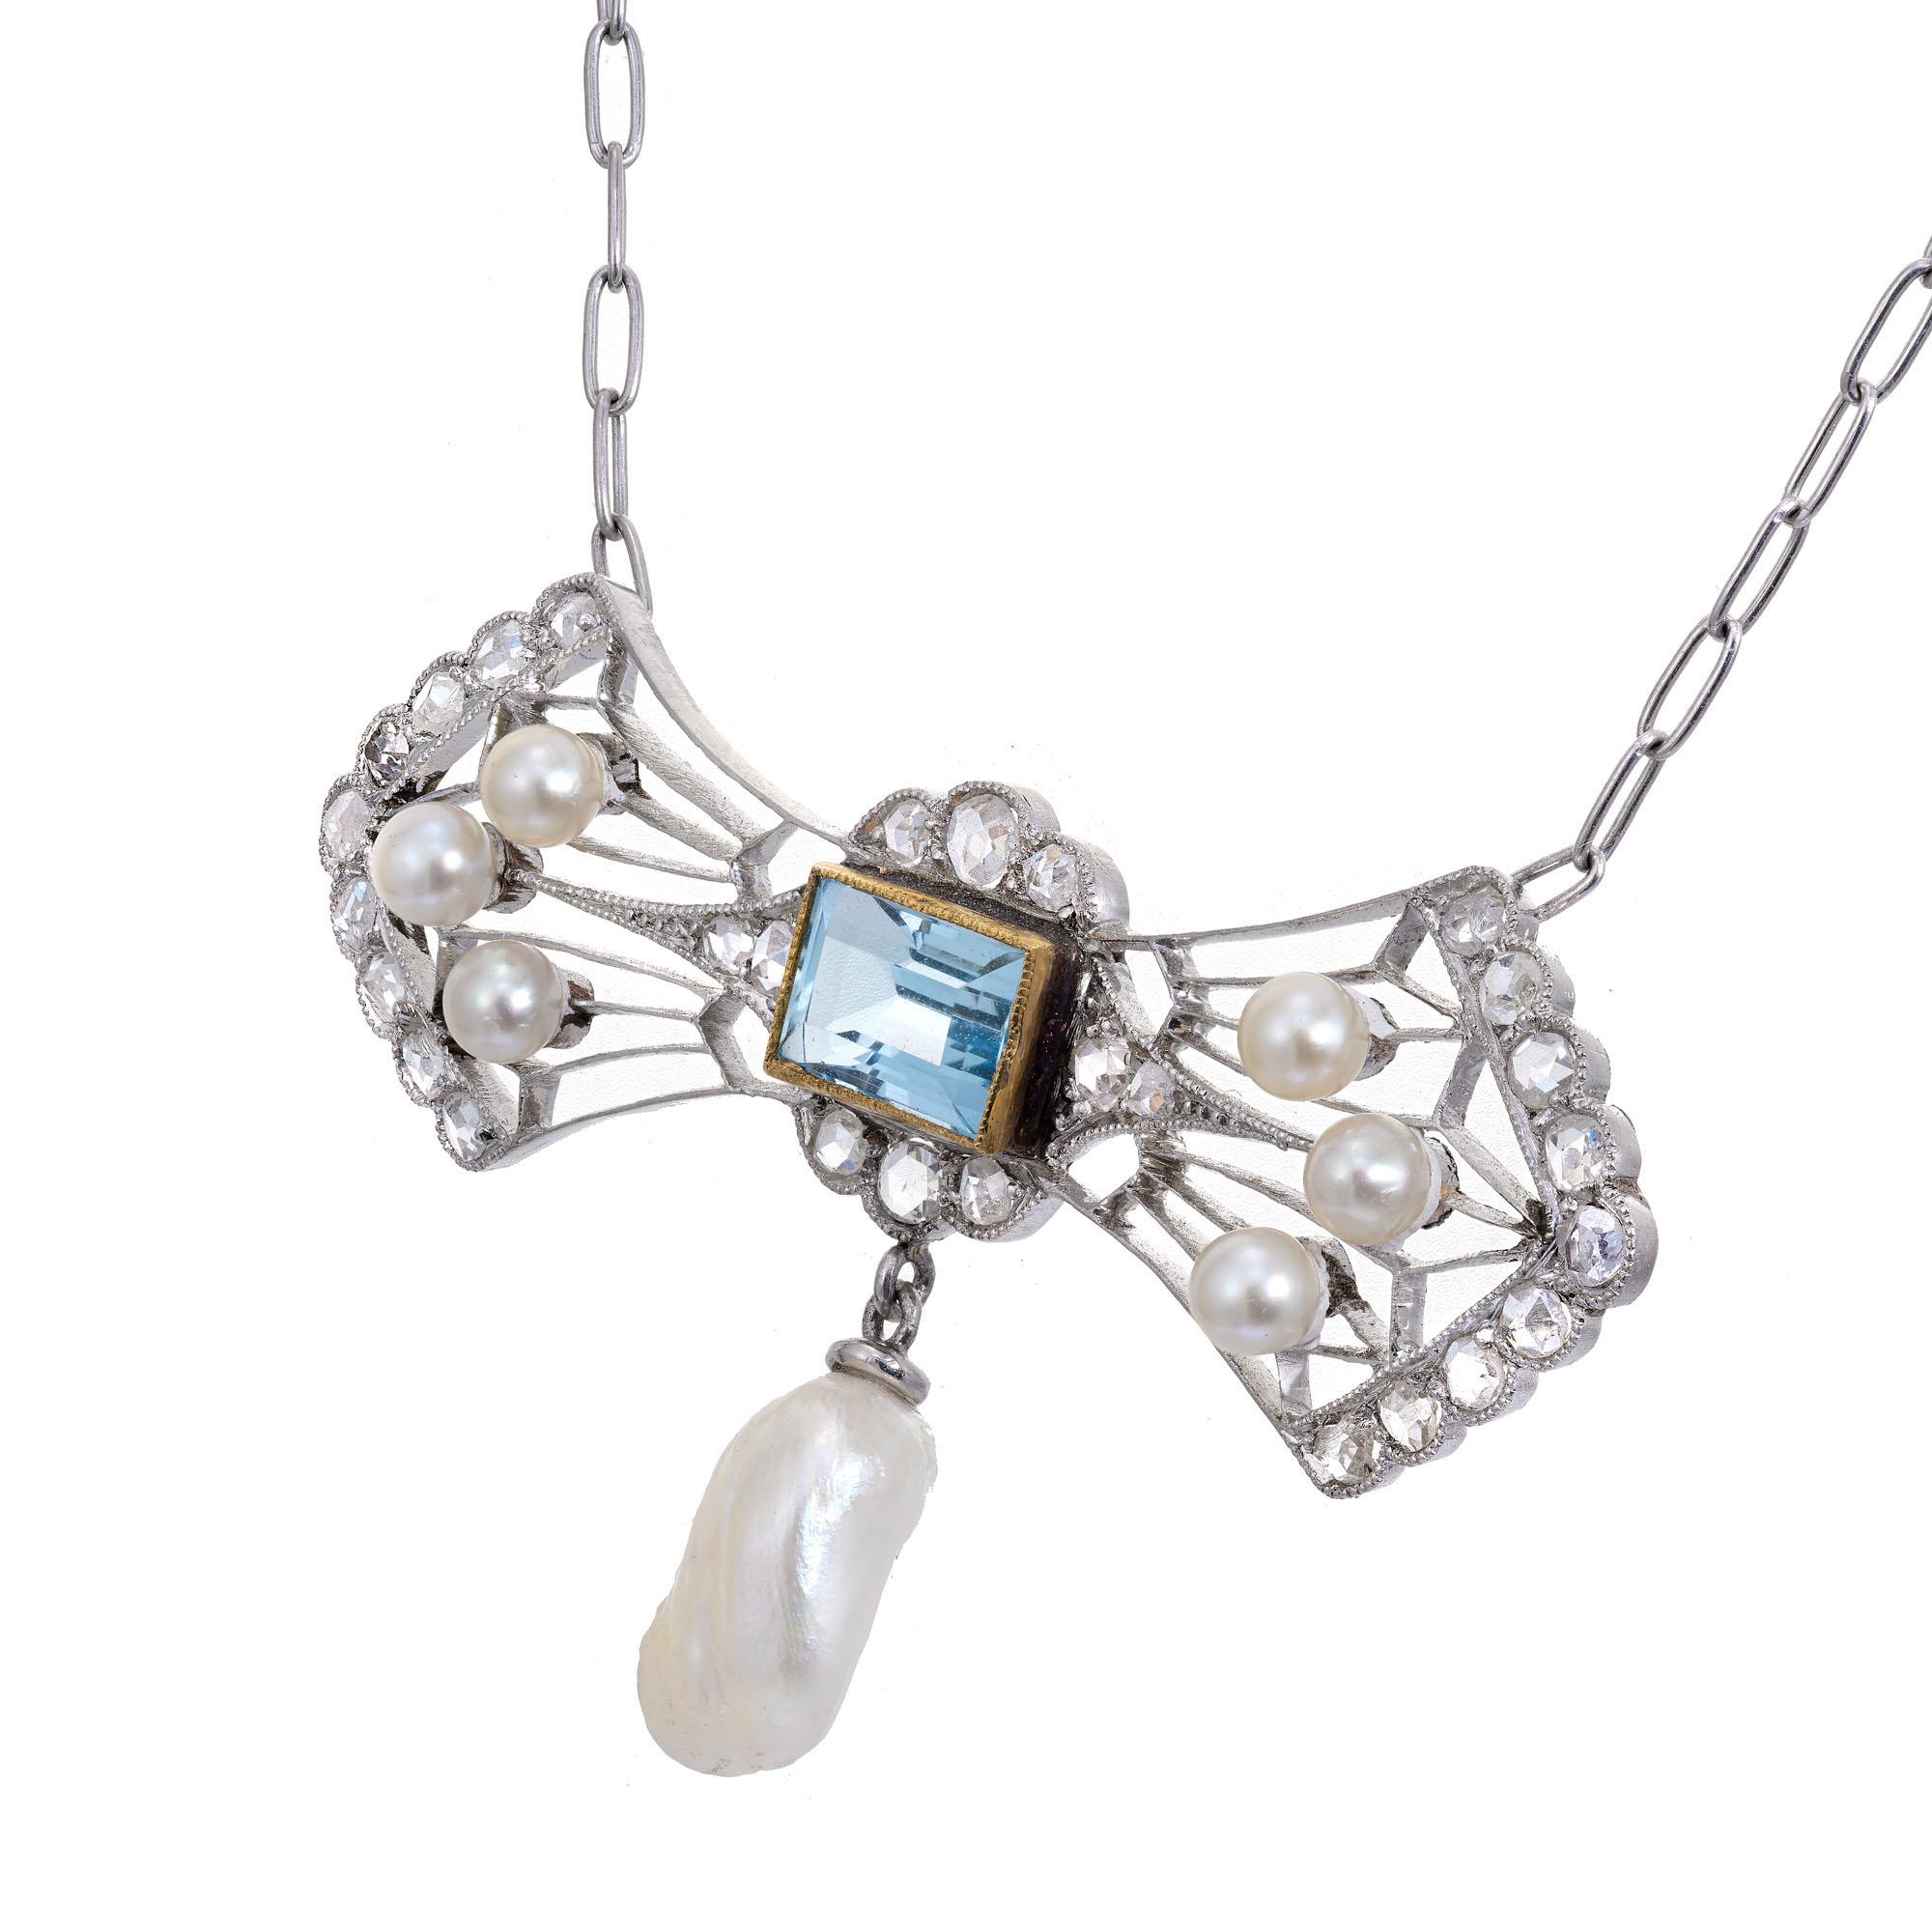 1890 to 1910 hand made Platinum delicate pendant necklace with natural untreated Aqua, natural round salt water pearls and a dangle natural Tennessee River fresh water pearl with 28 rose cut accent diamonds. 16.50 inches long.

1 natural light blue